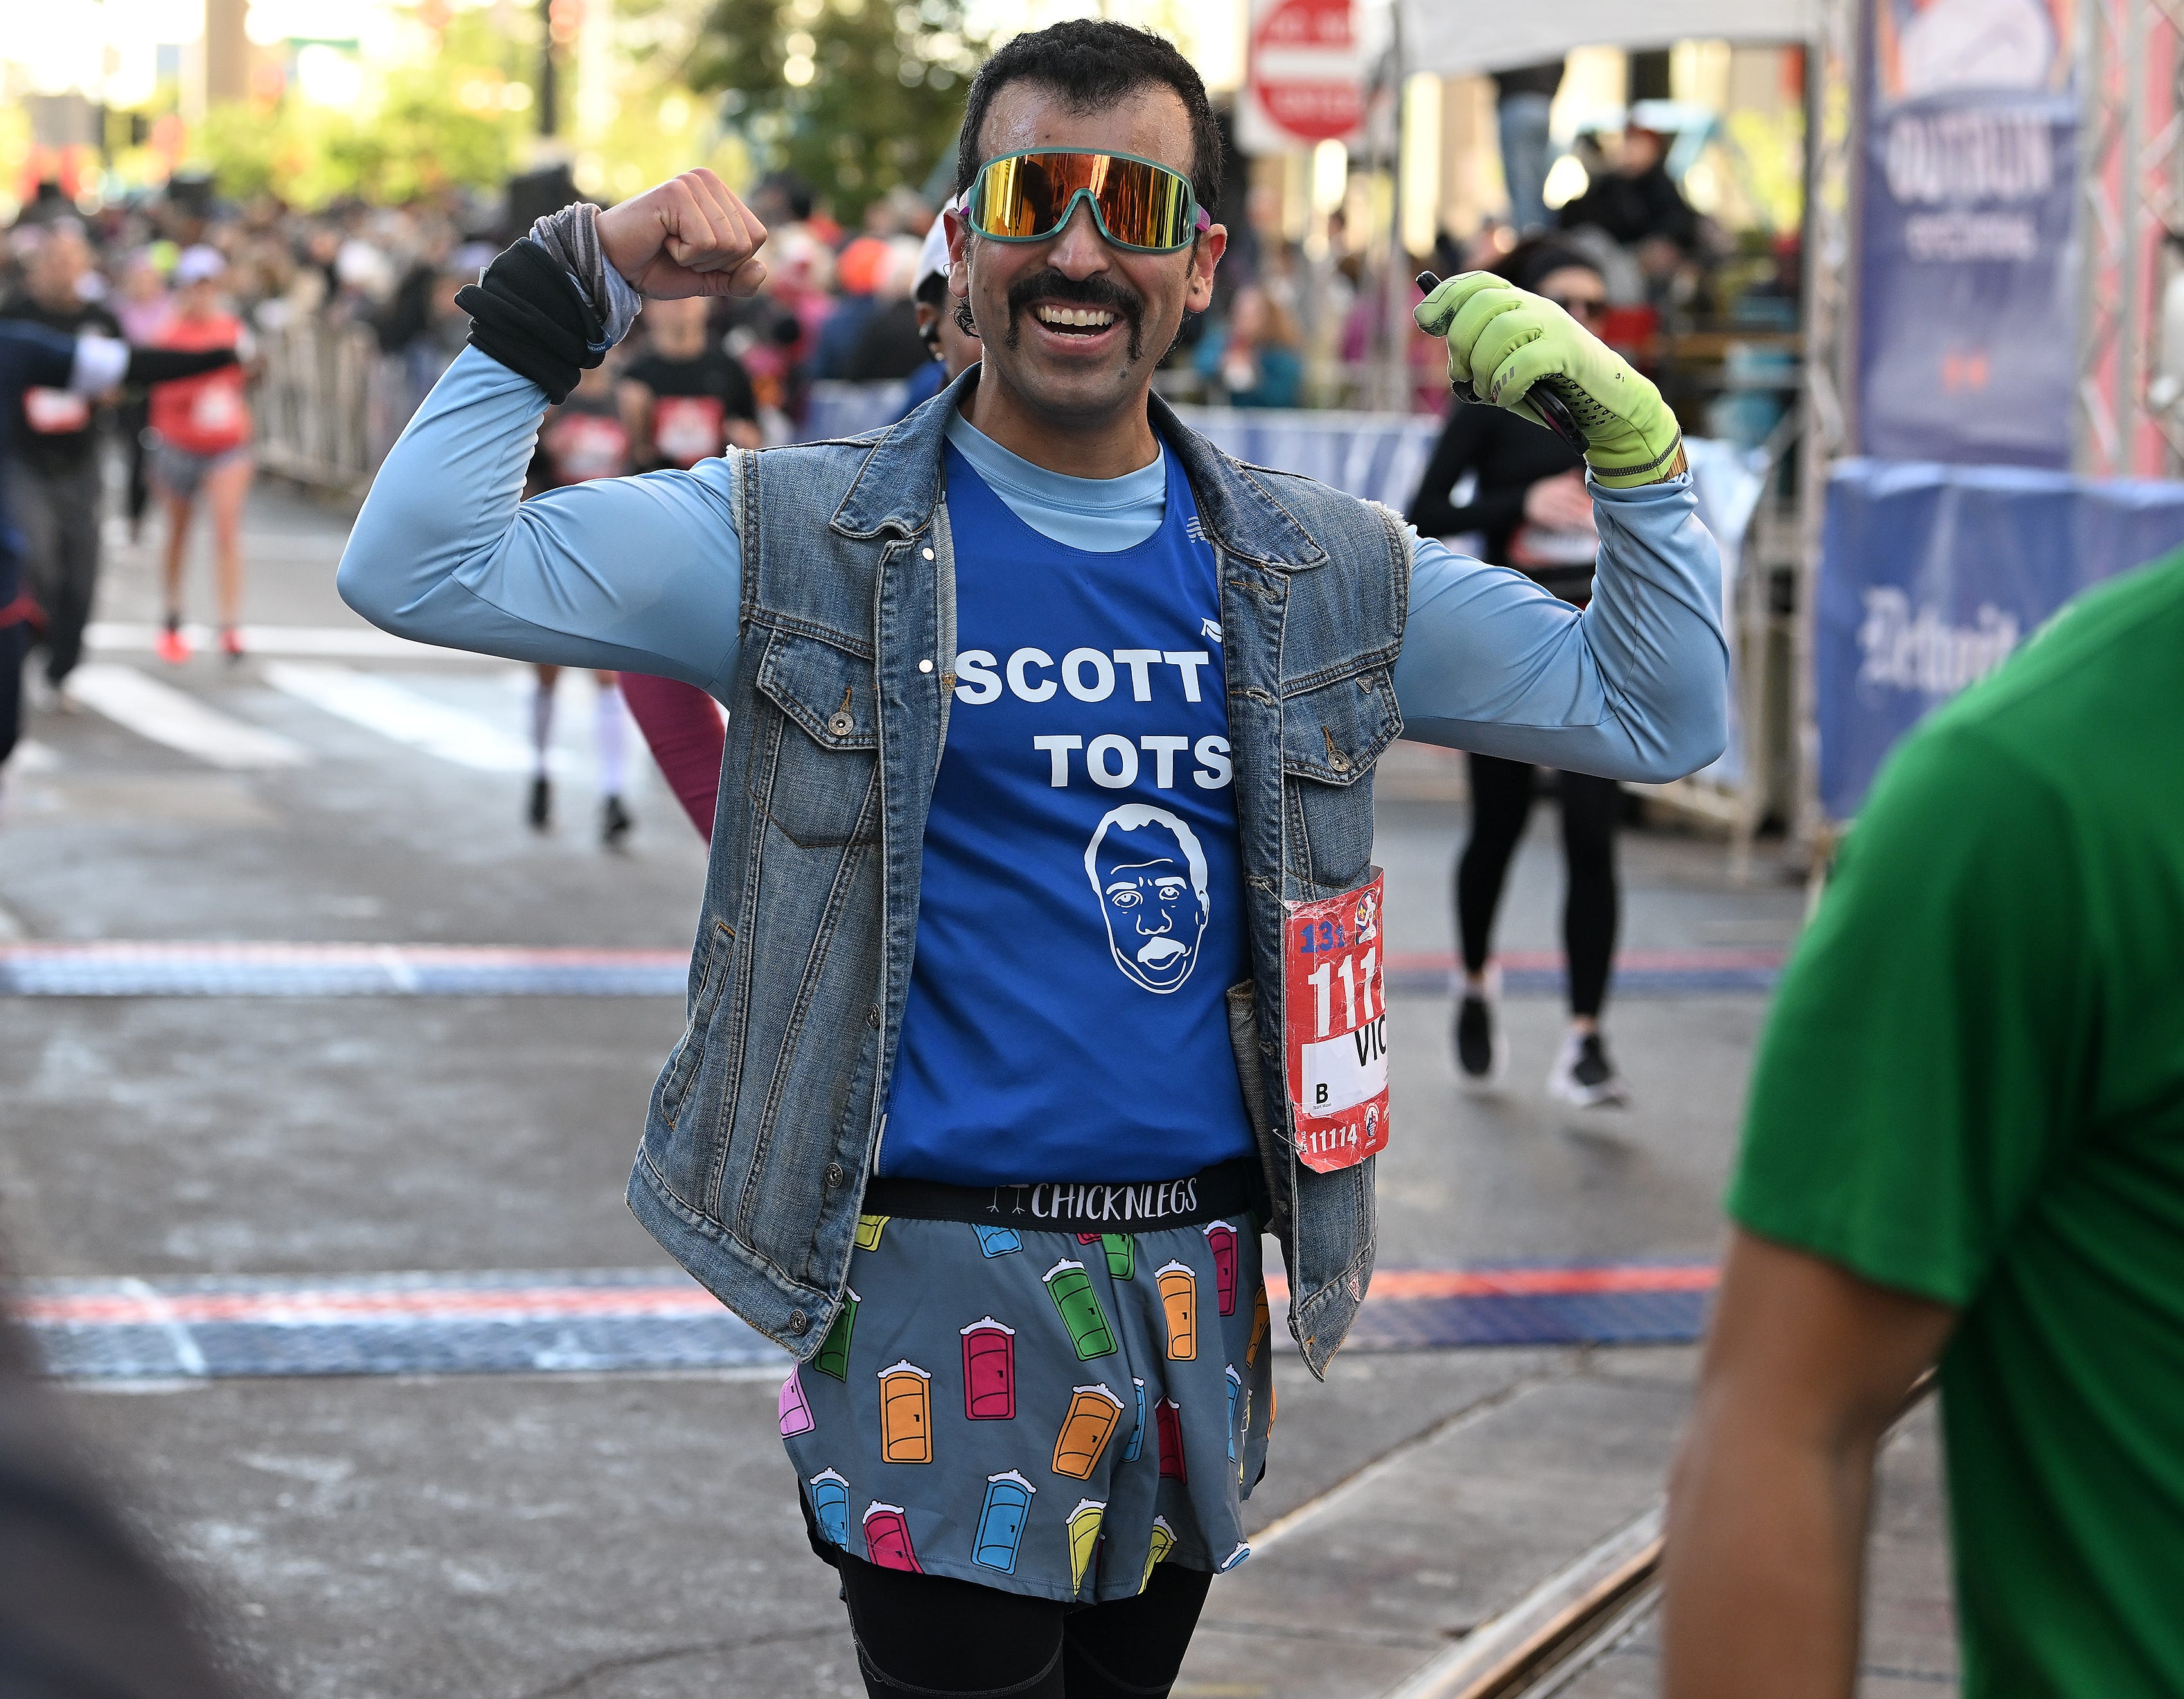 Victor Rojas Rodriguez, 39, of Westland reacts after finishing the half marathon.